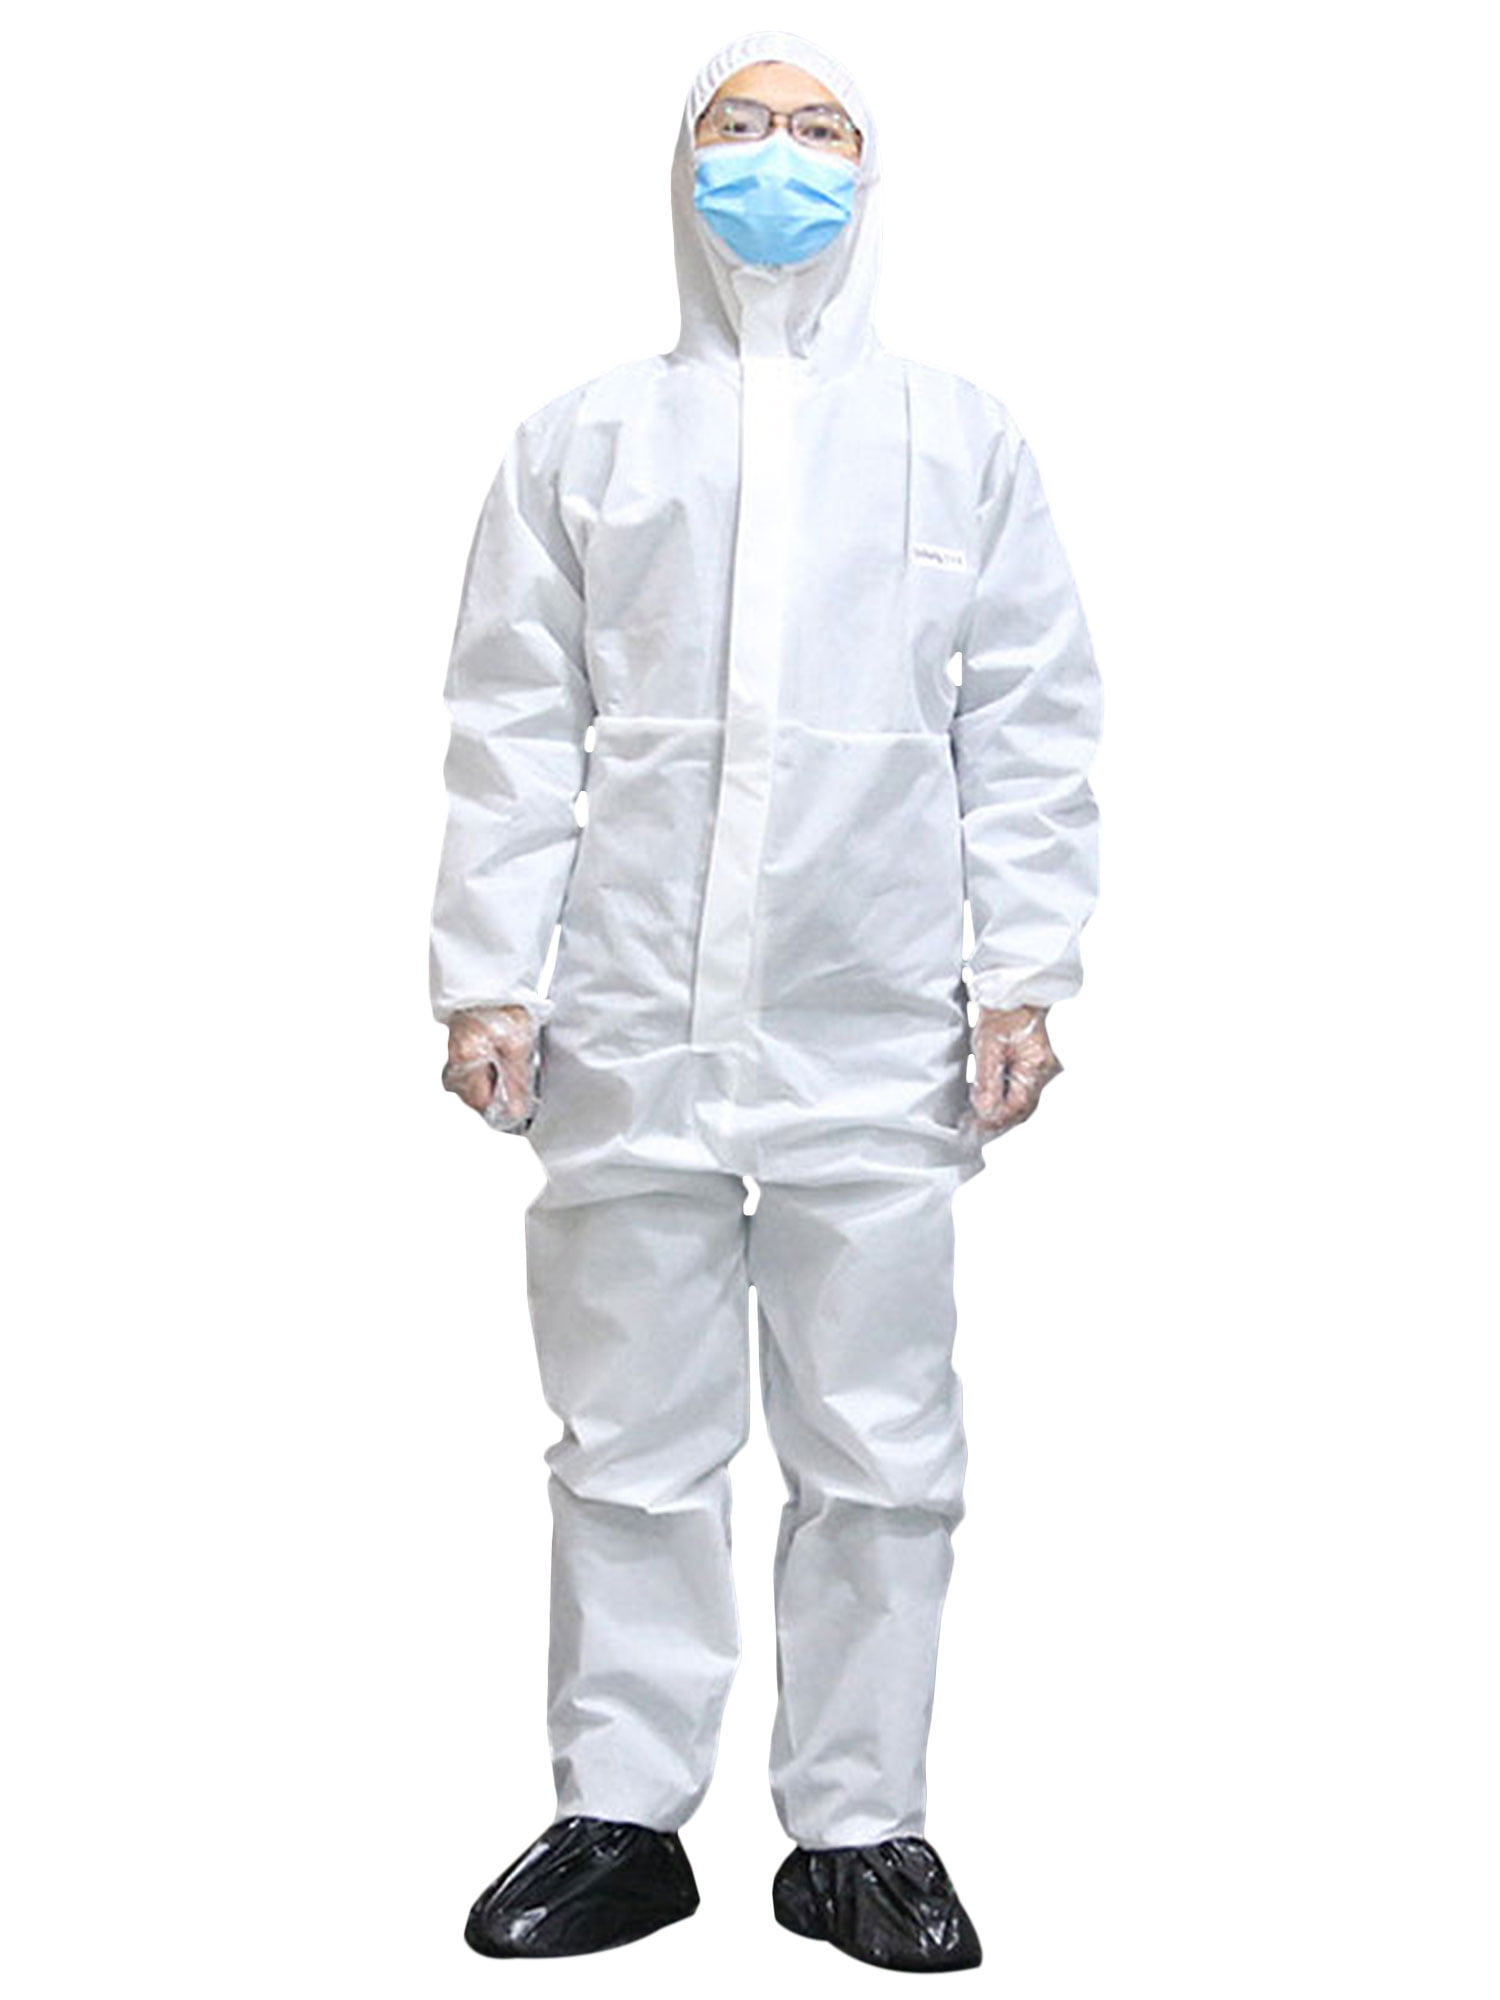 SSXY Disposable Protective Overalls Non-Woven Handling Dust Coverall for Woker/Laboratory,White-M